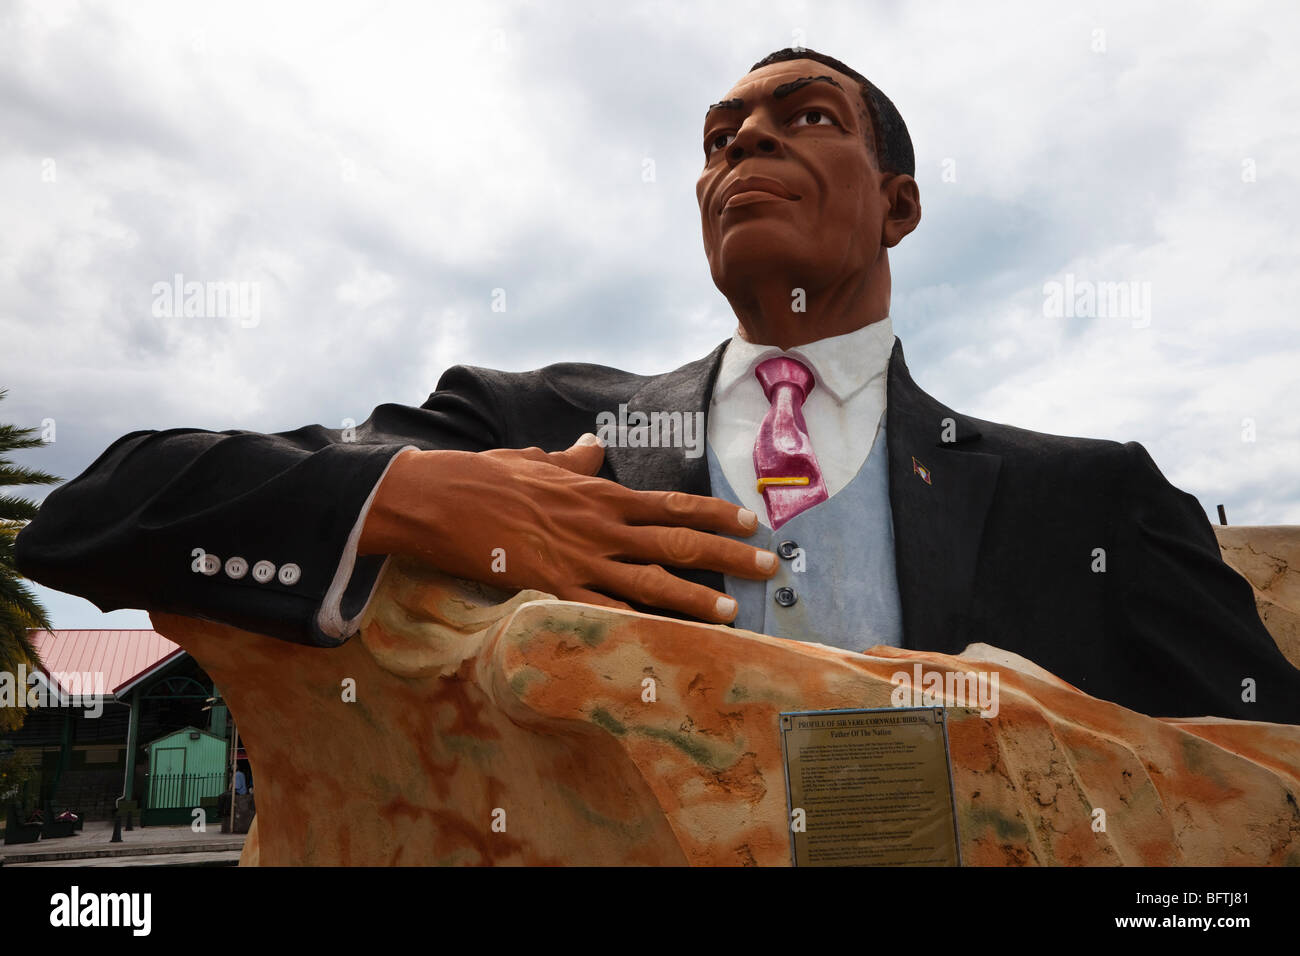 statue of Sir Vere Cornwall Bird, 09.12.09 - 28.06.99, politician and leader of the Antiguan Labour Party, St Johns, Antigua. Stock Photo